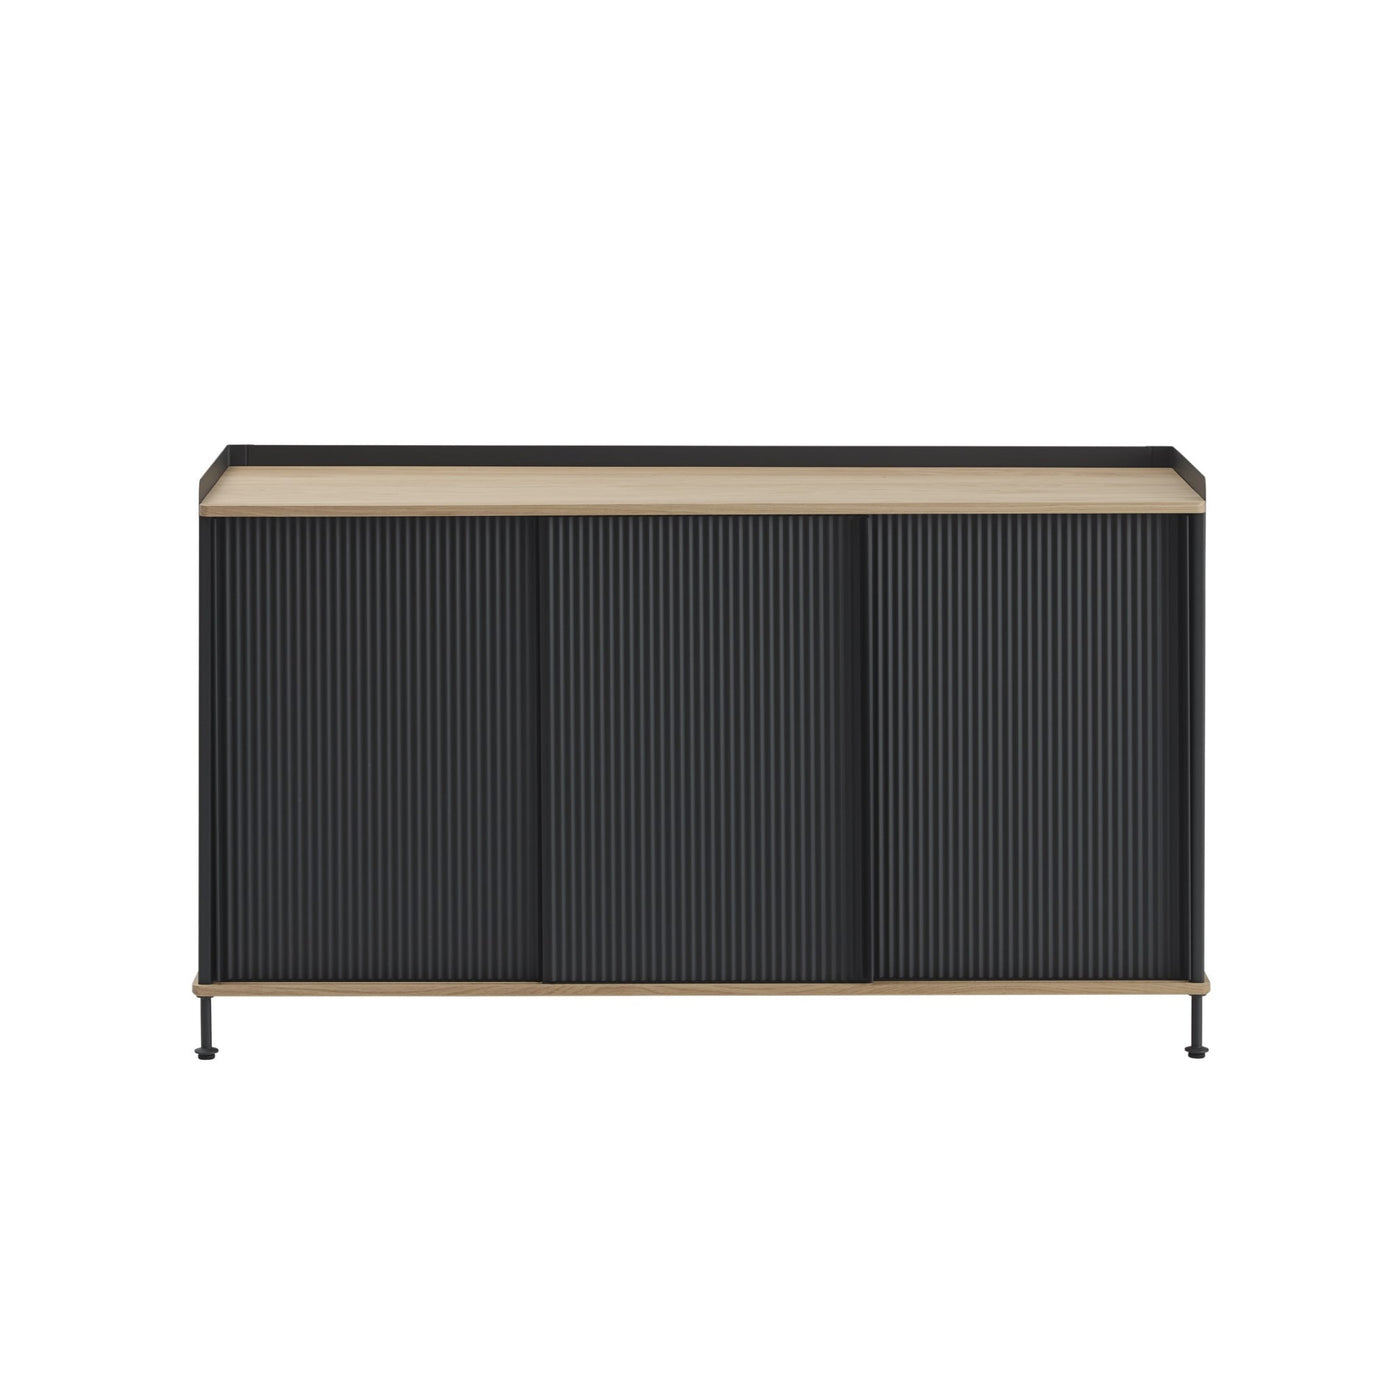 Muuto Enfold Sideboard. Free UK delivery from someday designs. #colour_solid-oak-anthracite-black